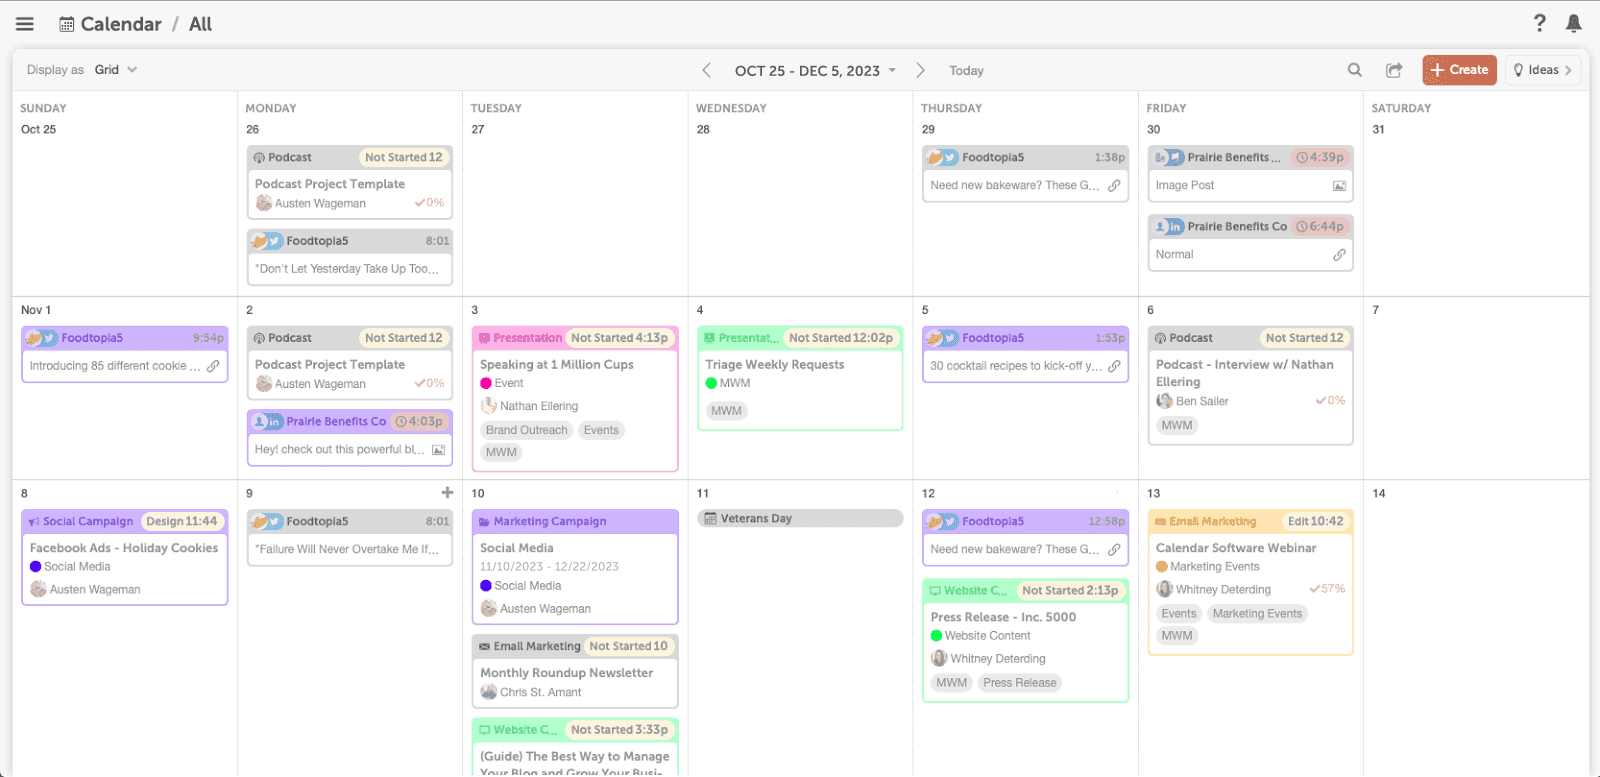 Create an efficient marketing calendar to keep up to date and on track